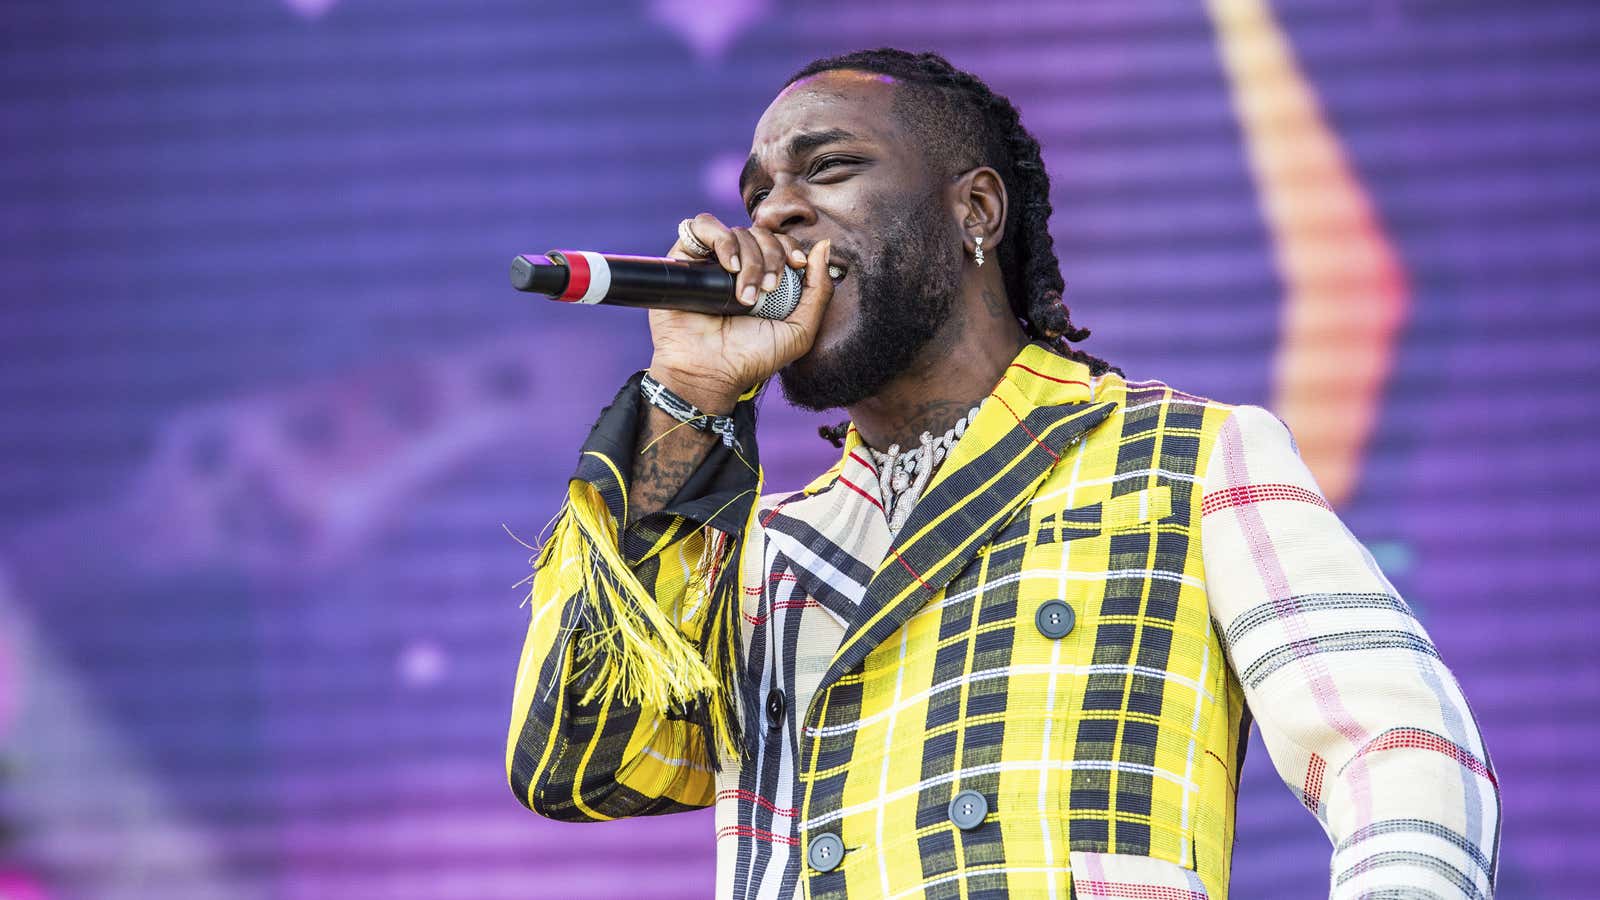 Burna Boy is currently one of Africa’s top music stars